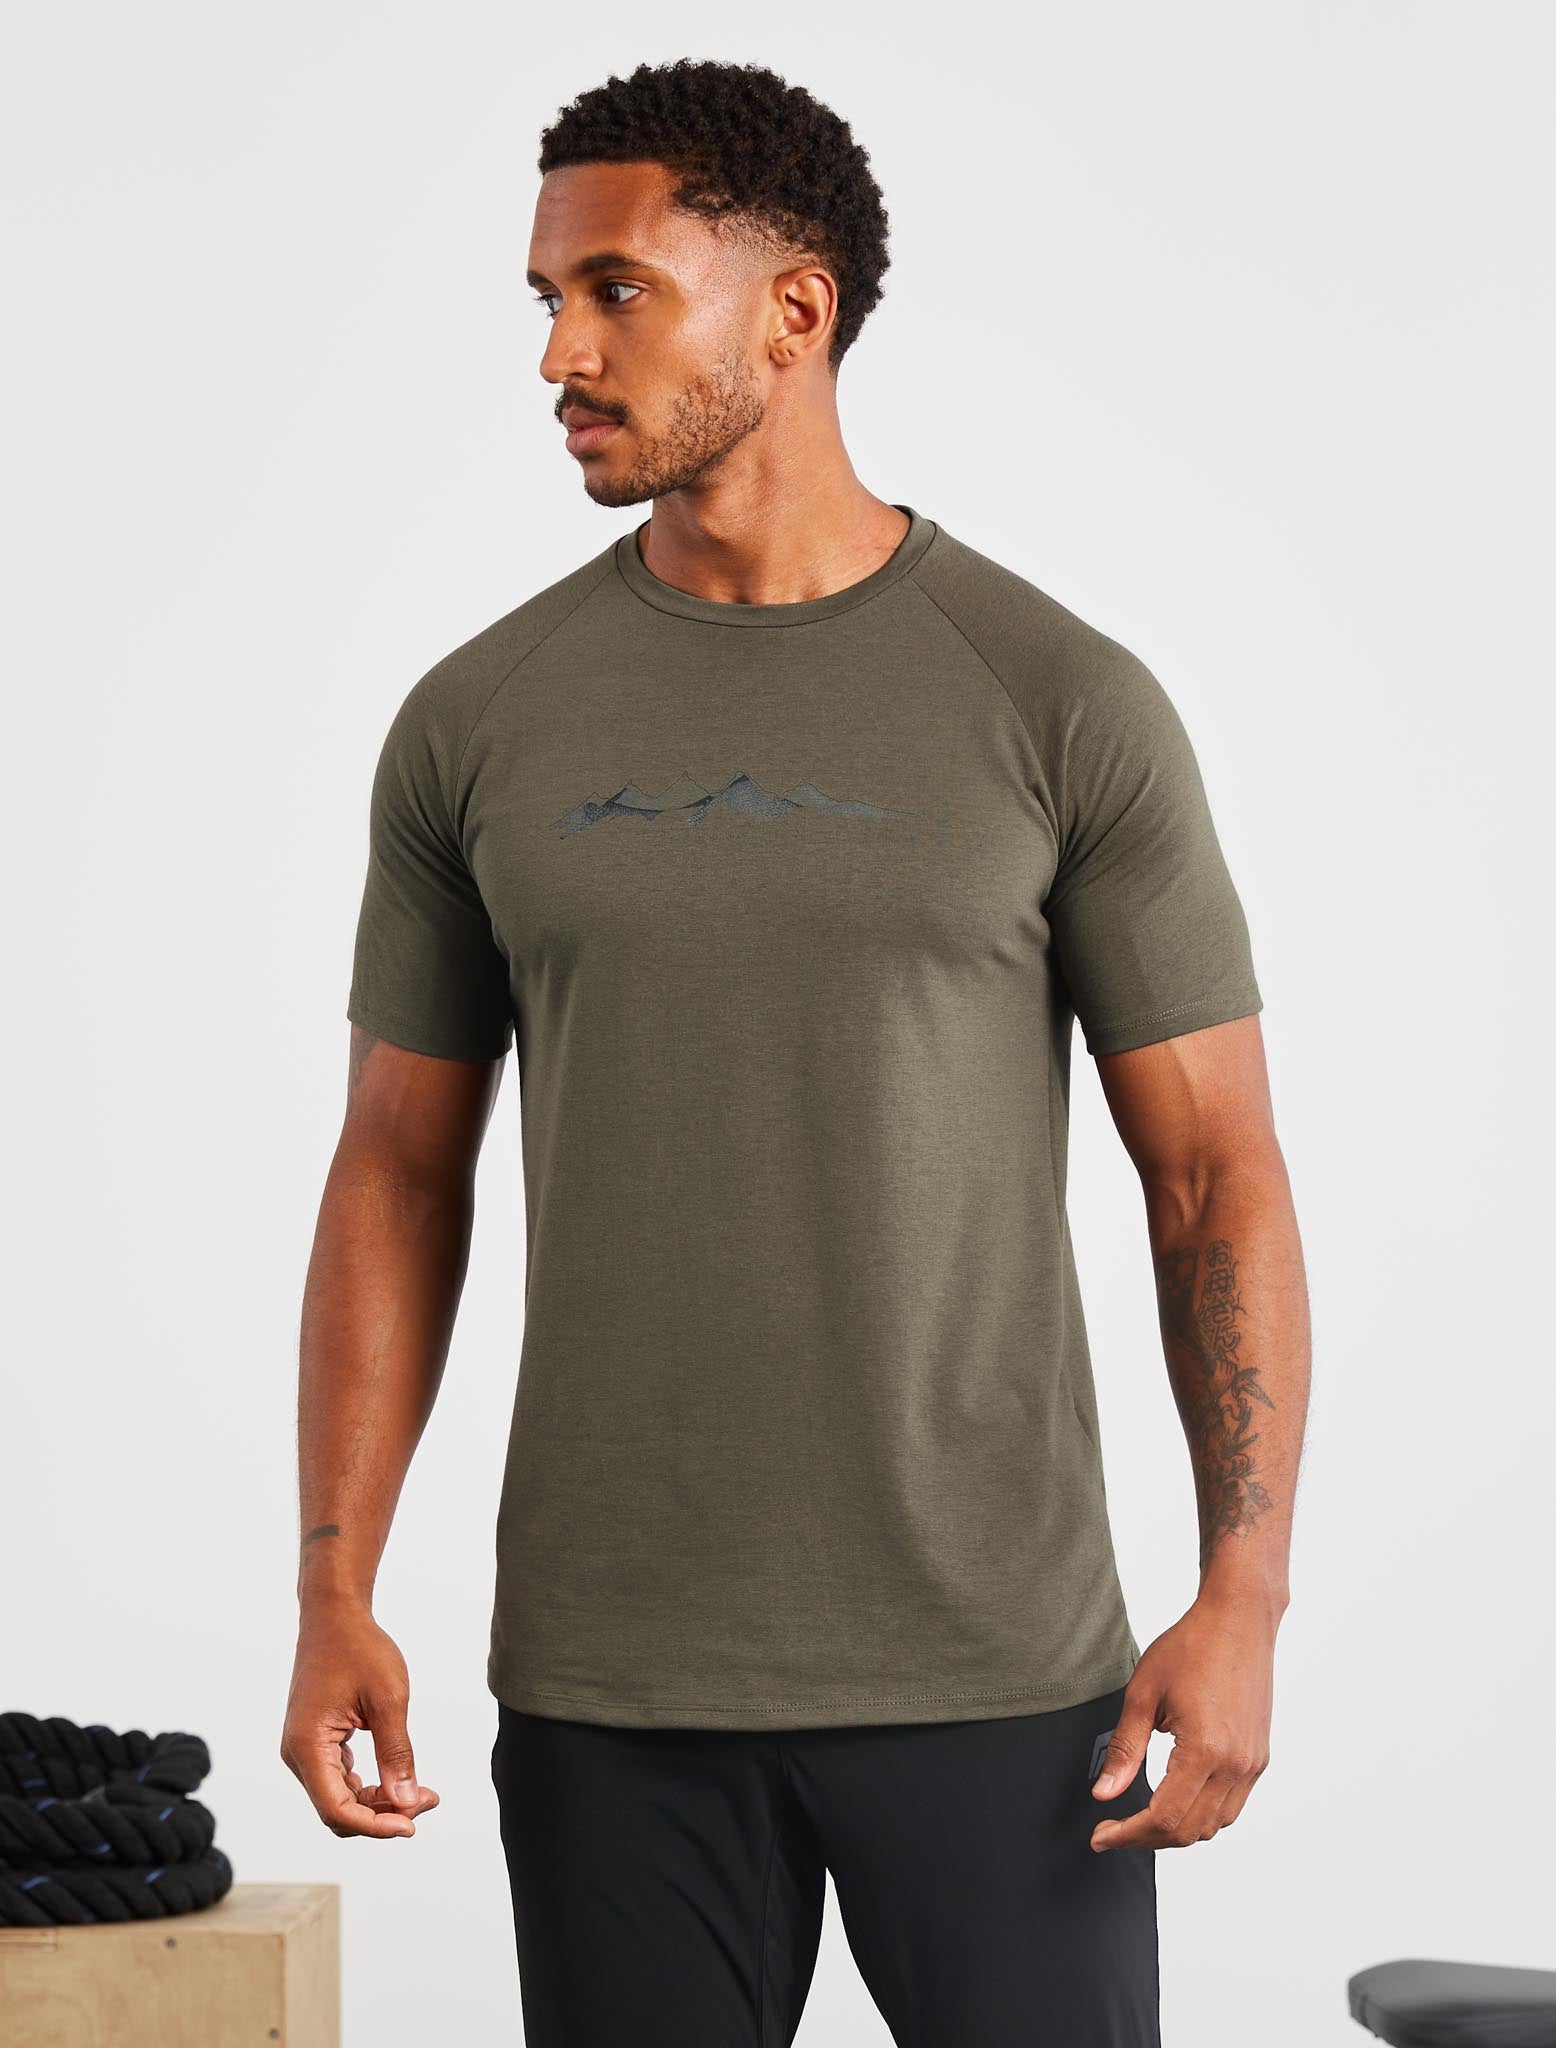 Utility T-Shirt / Olive Pursue Fitness 1